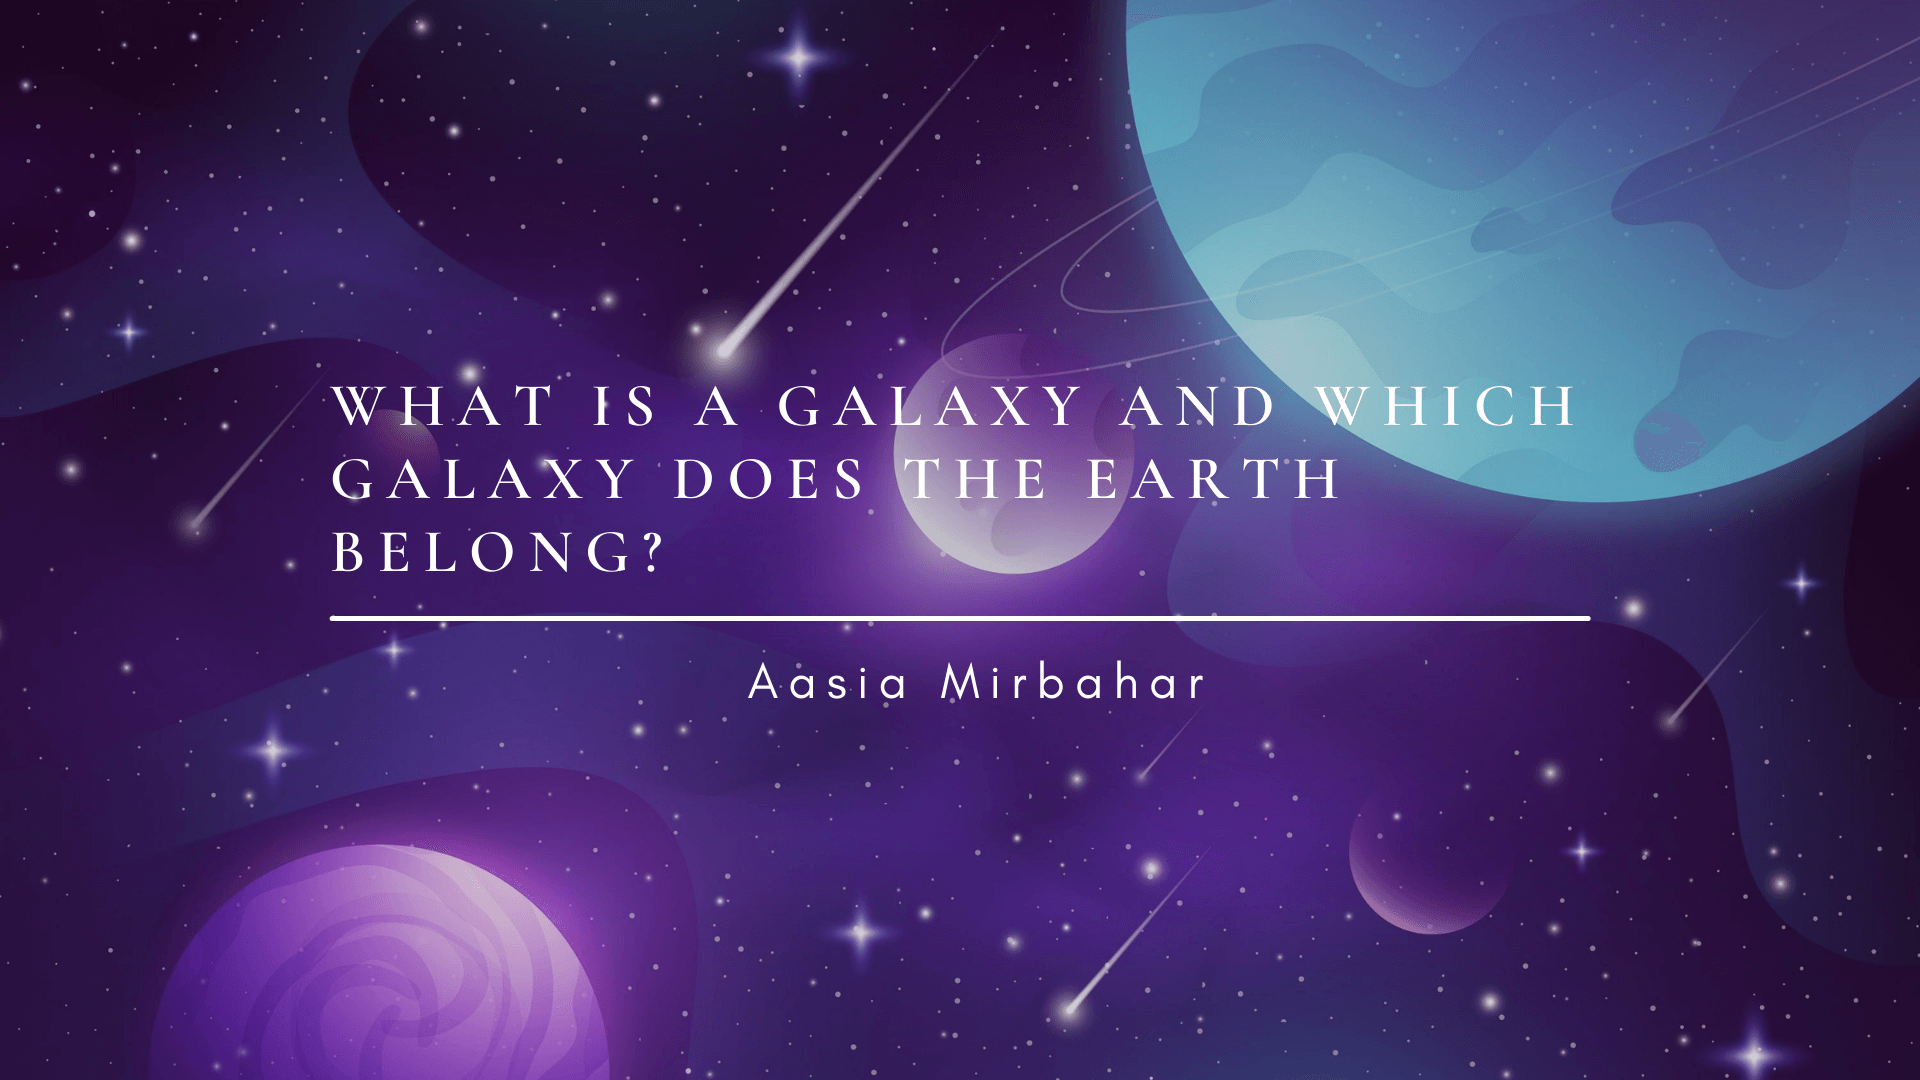 What is a galaxy and which galaxy does the earth belong?